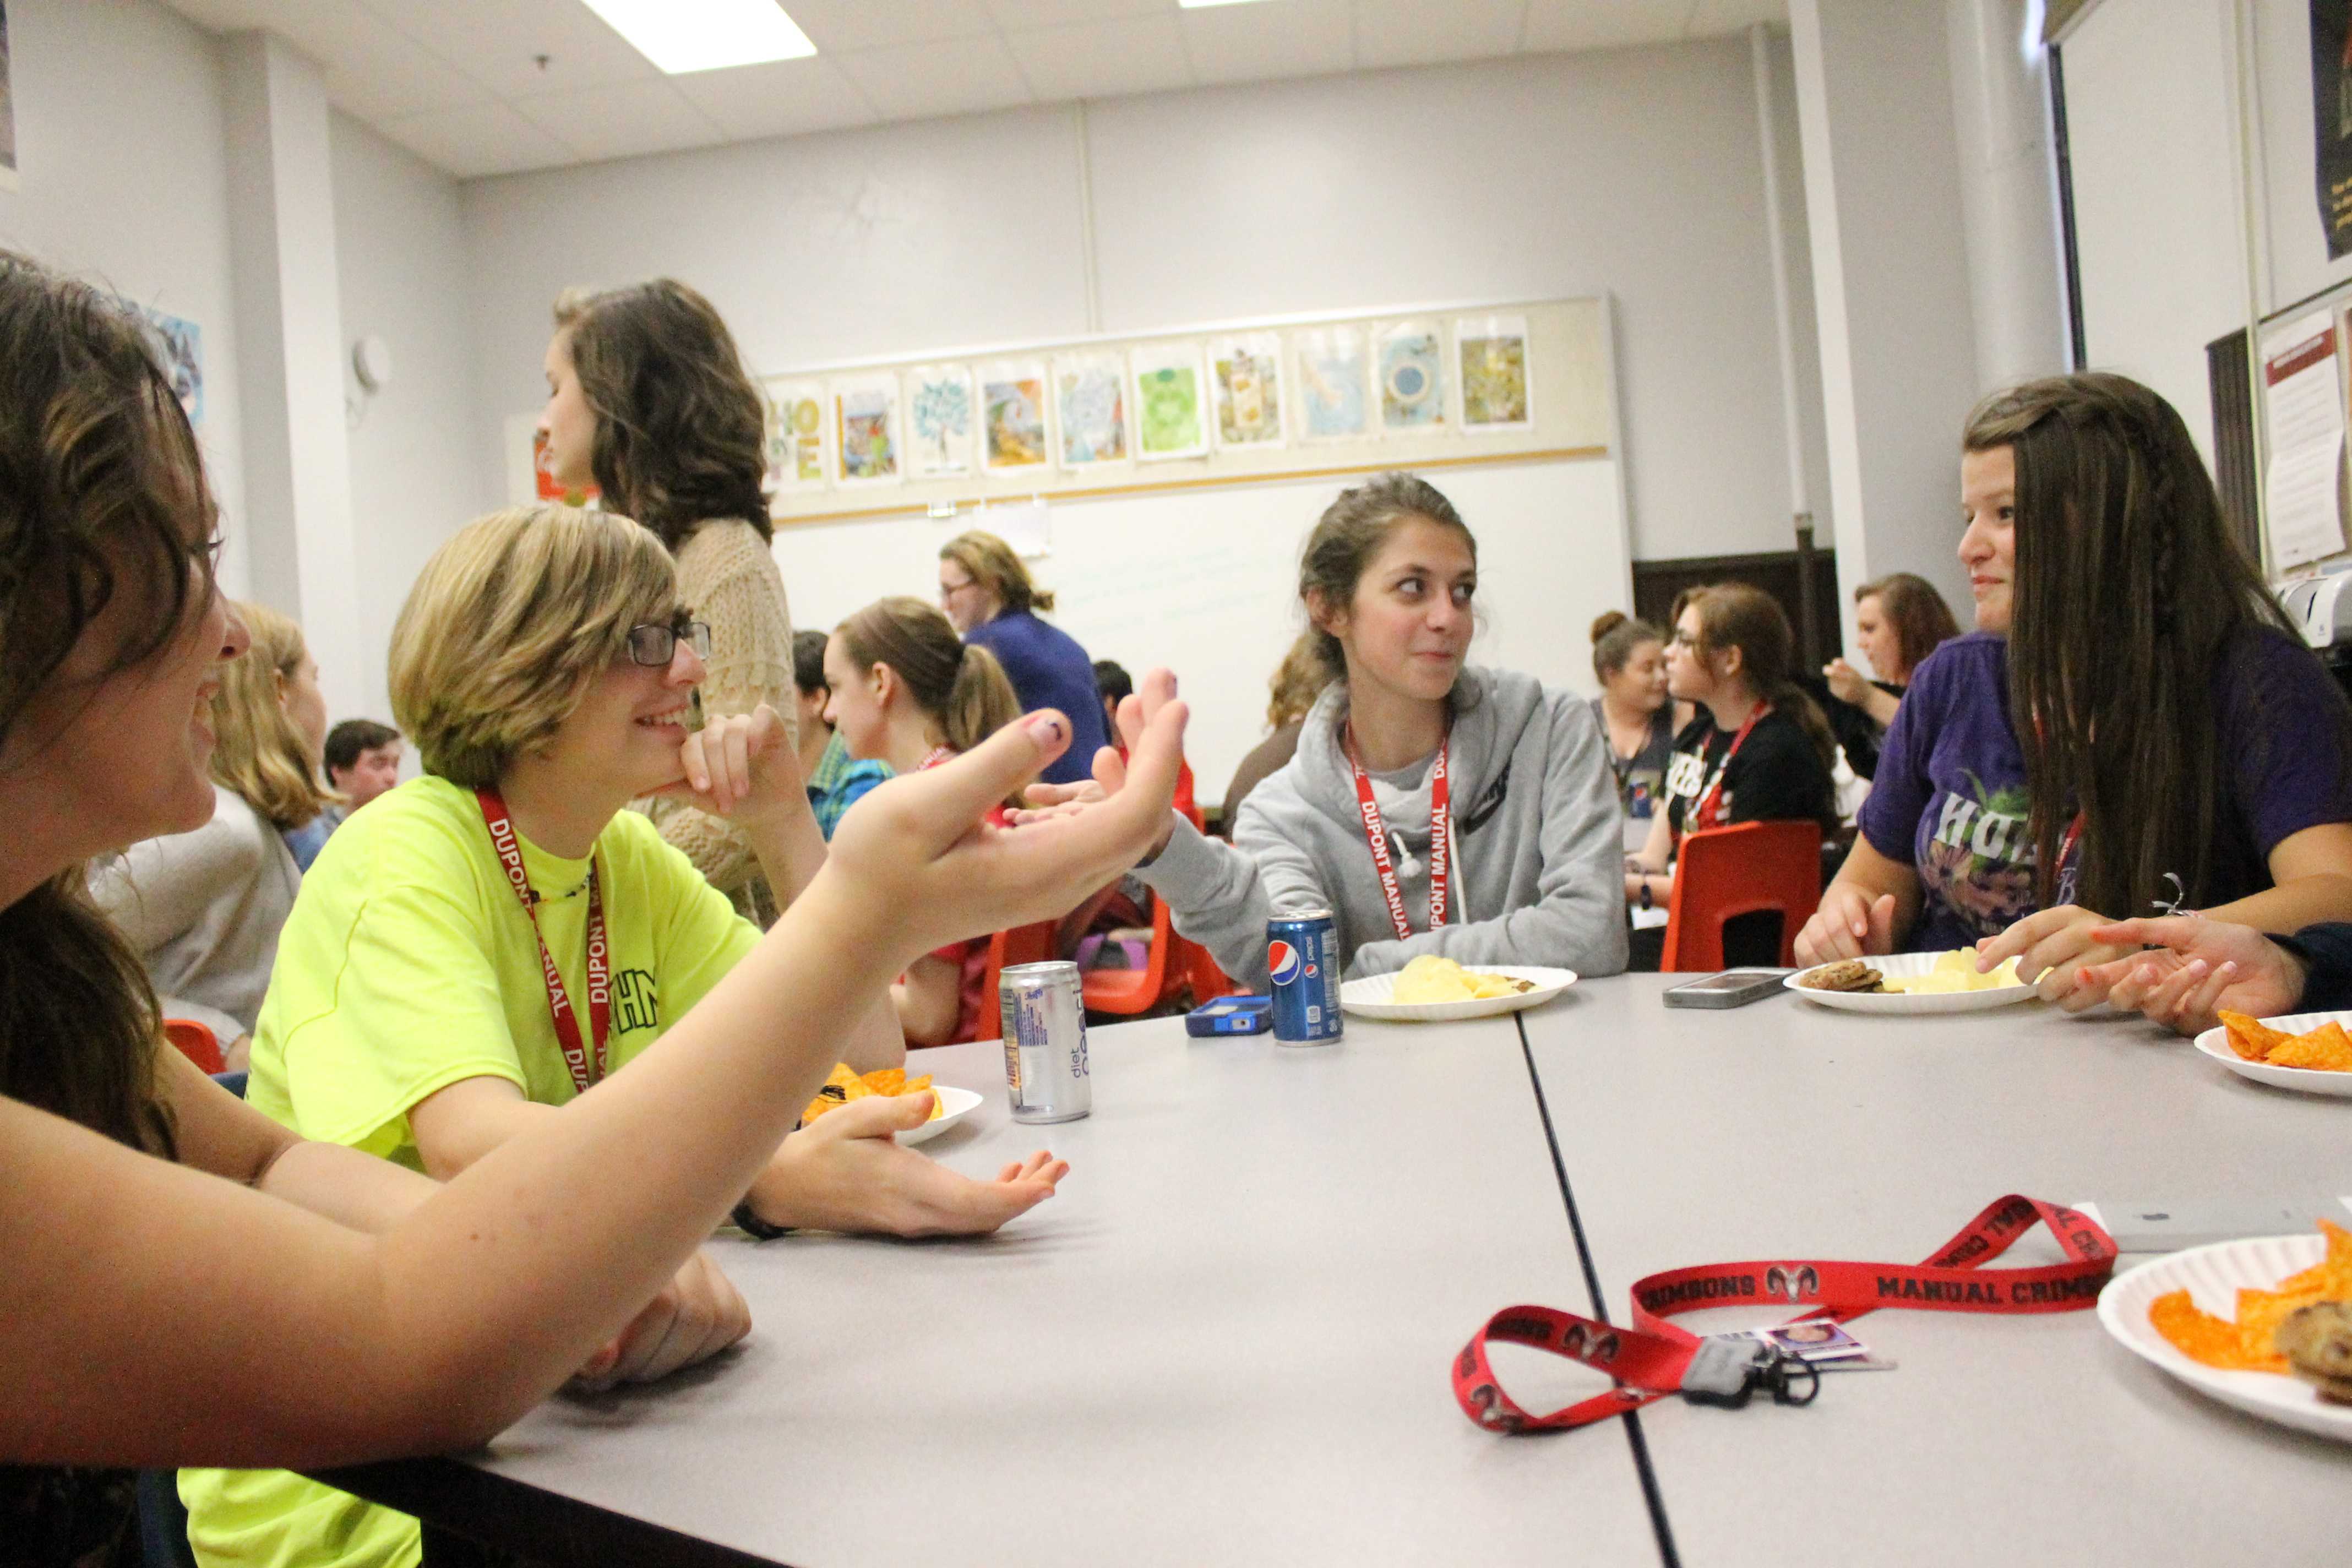 Manual students partner with UN to start new club